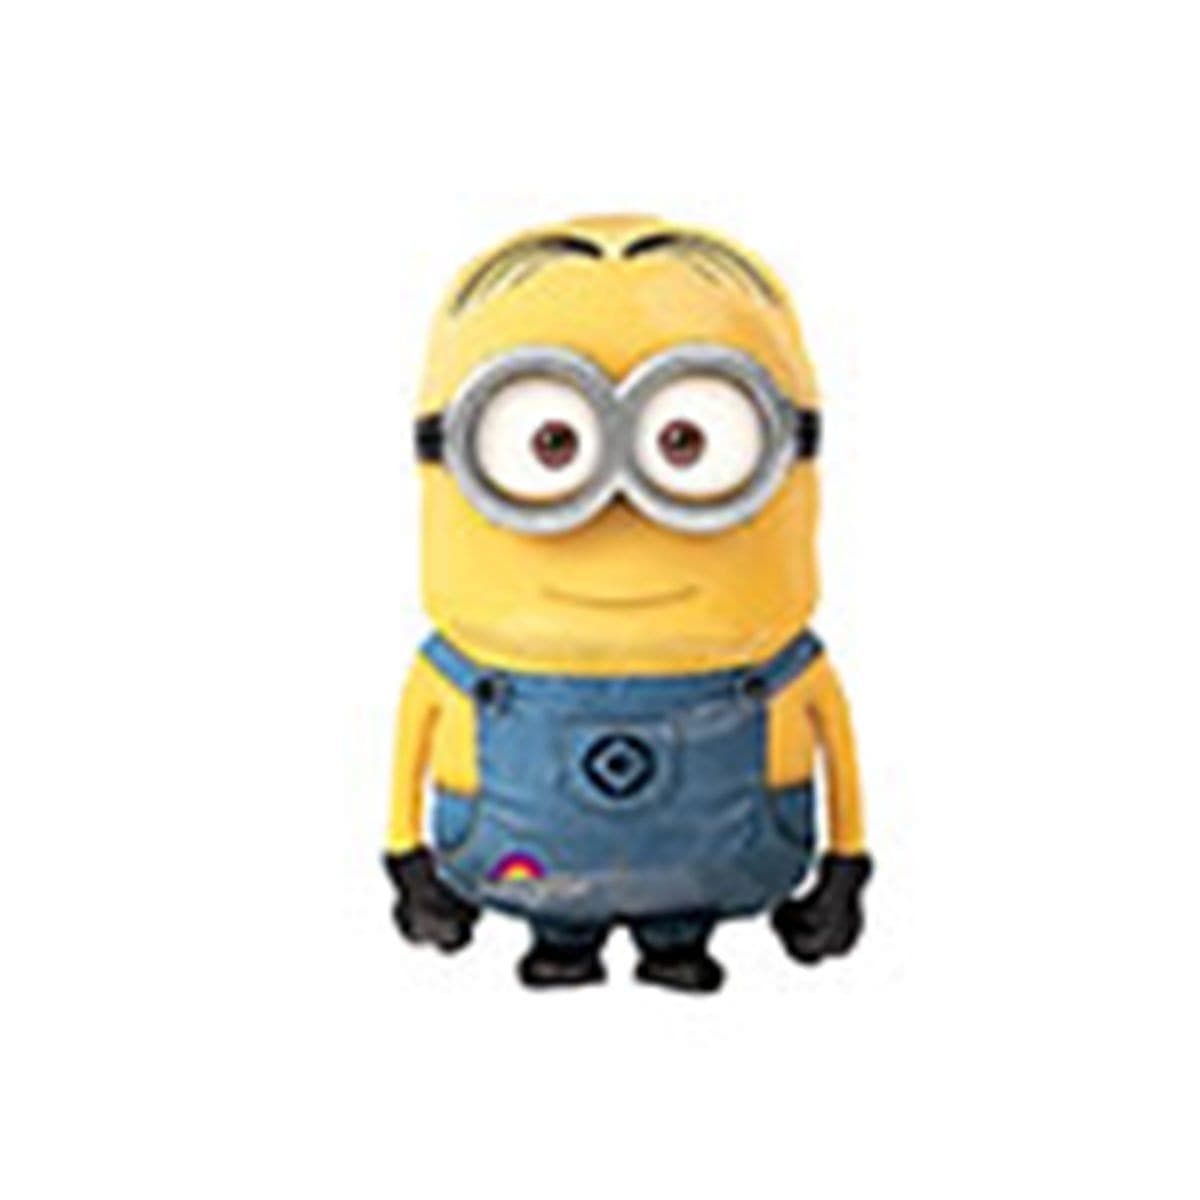 Buy Balloons Giant Minion Air Walker Balloon sold at Party Expert